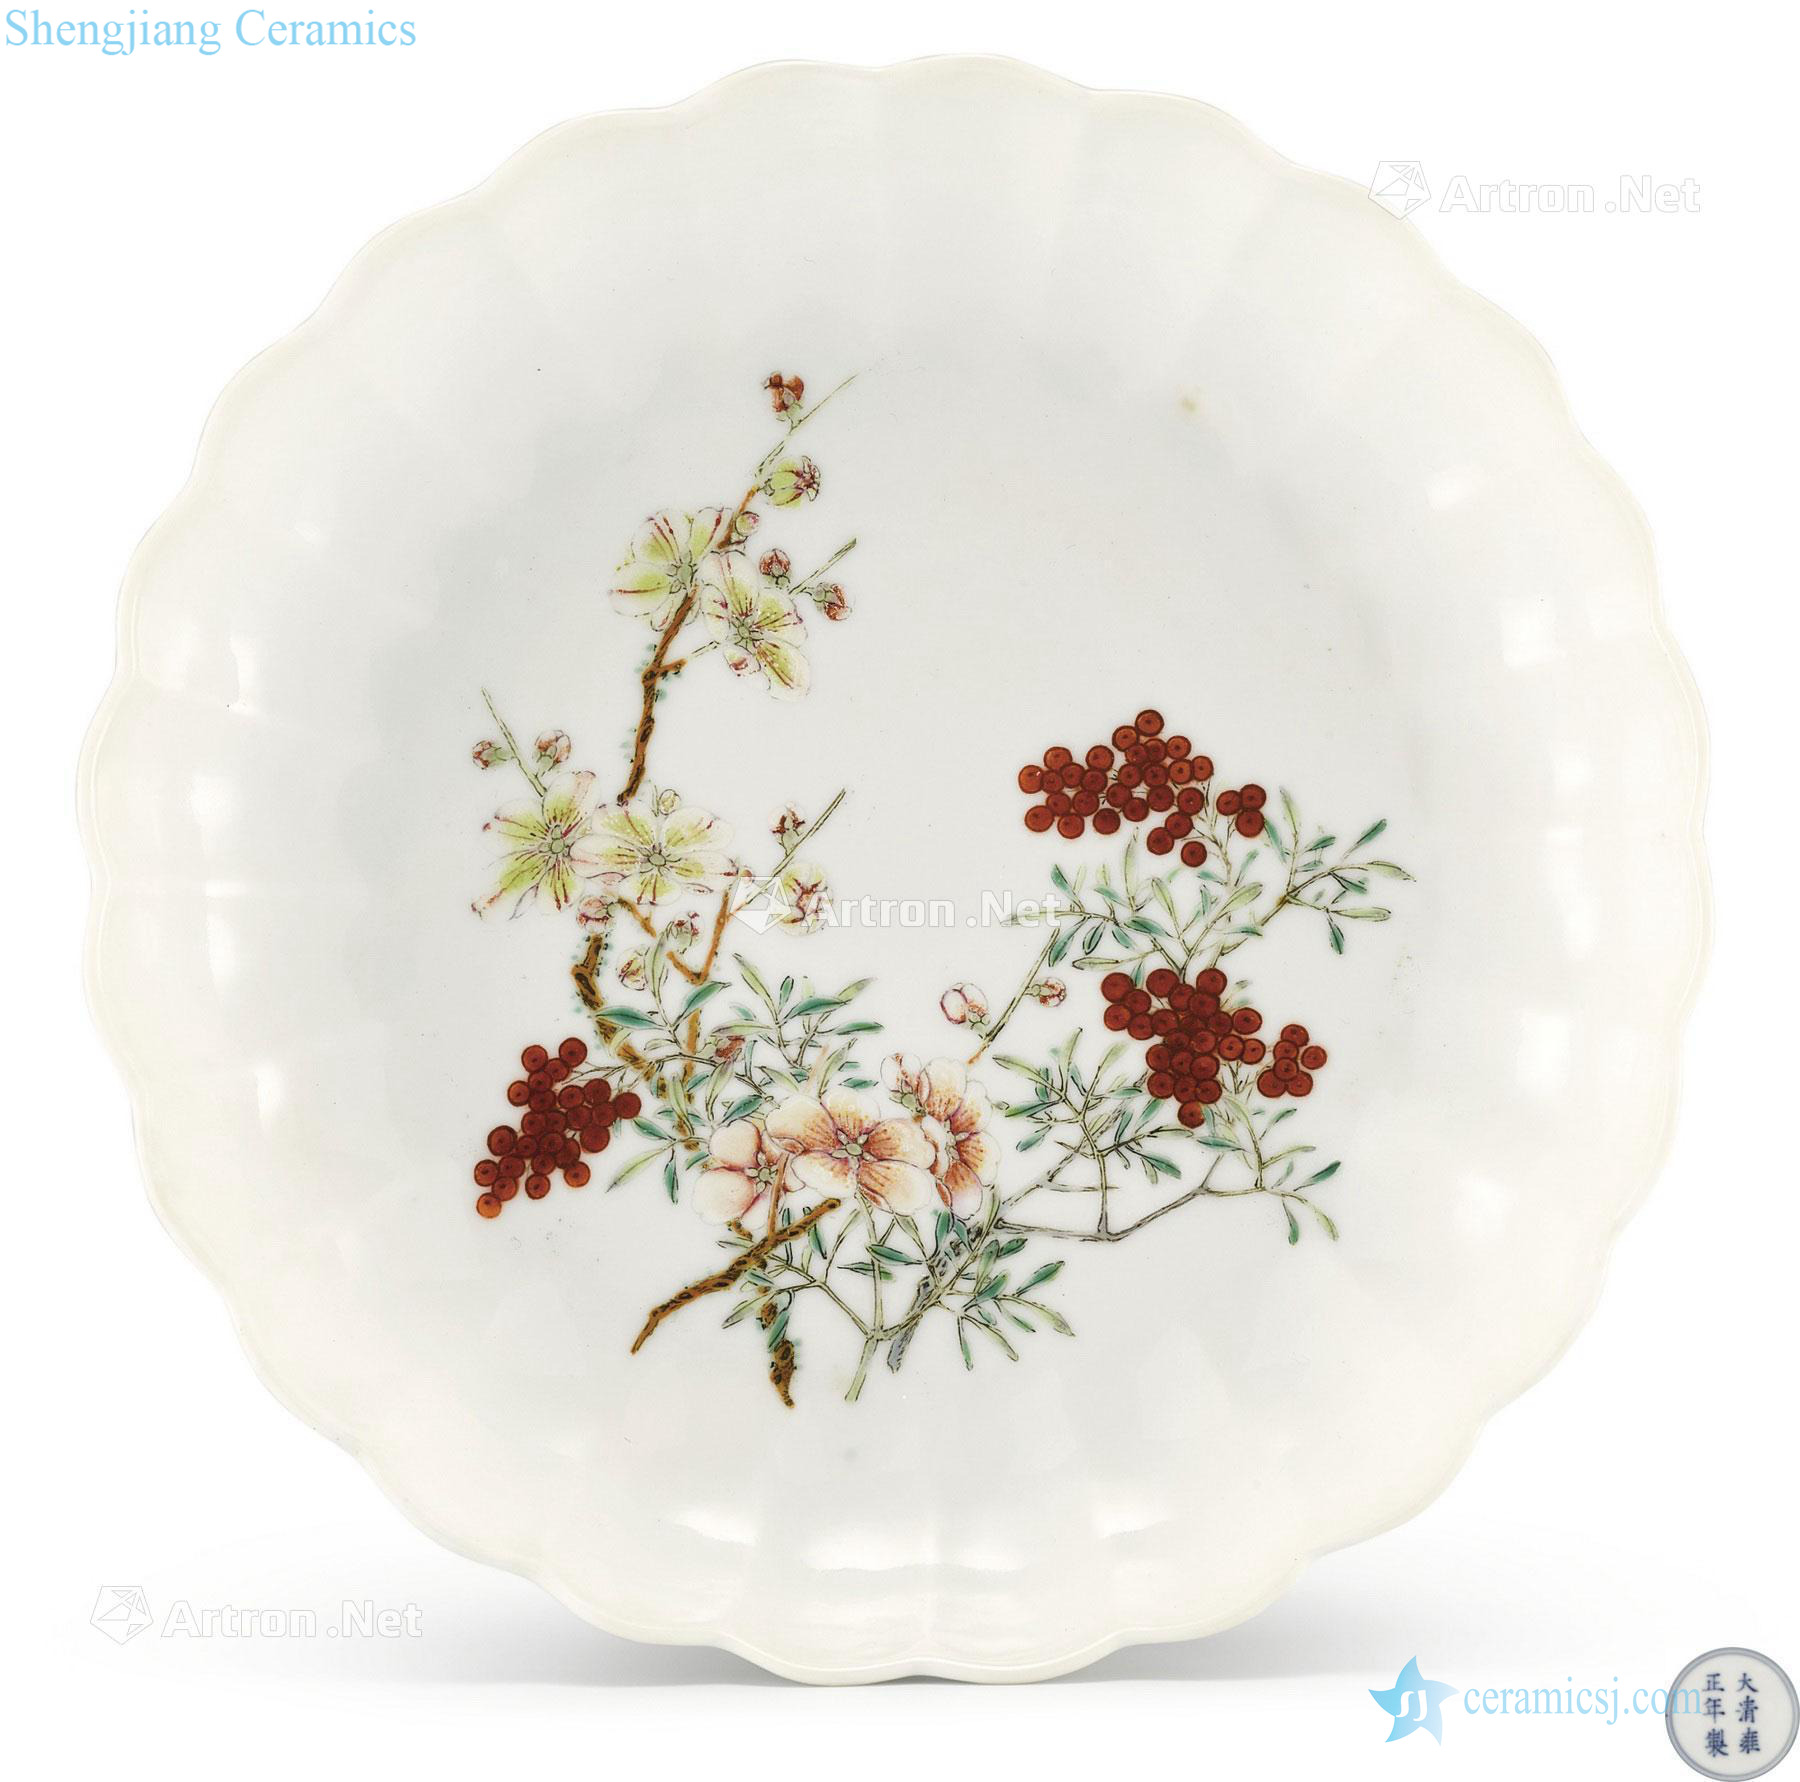 After the qing yongzheng white glaze with pastel flowers figure chrysanthemum petals fold branches